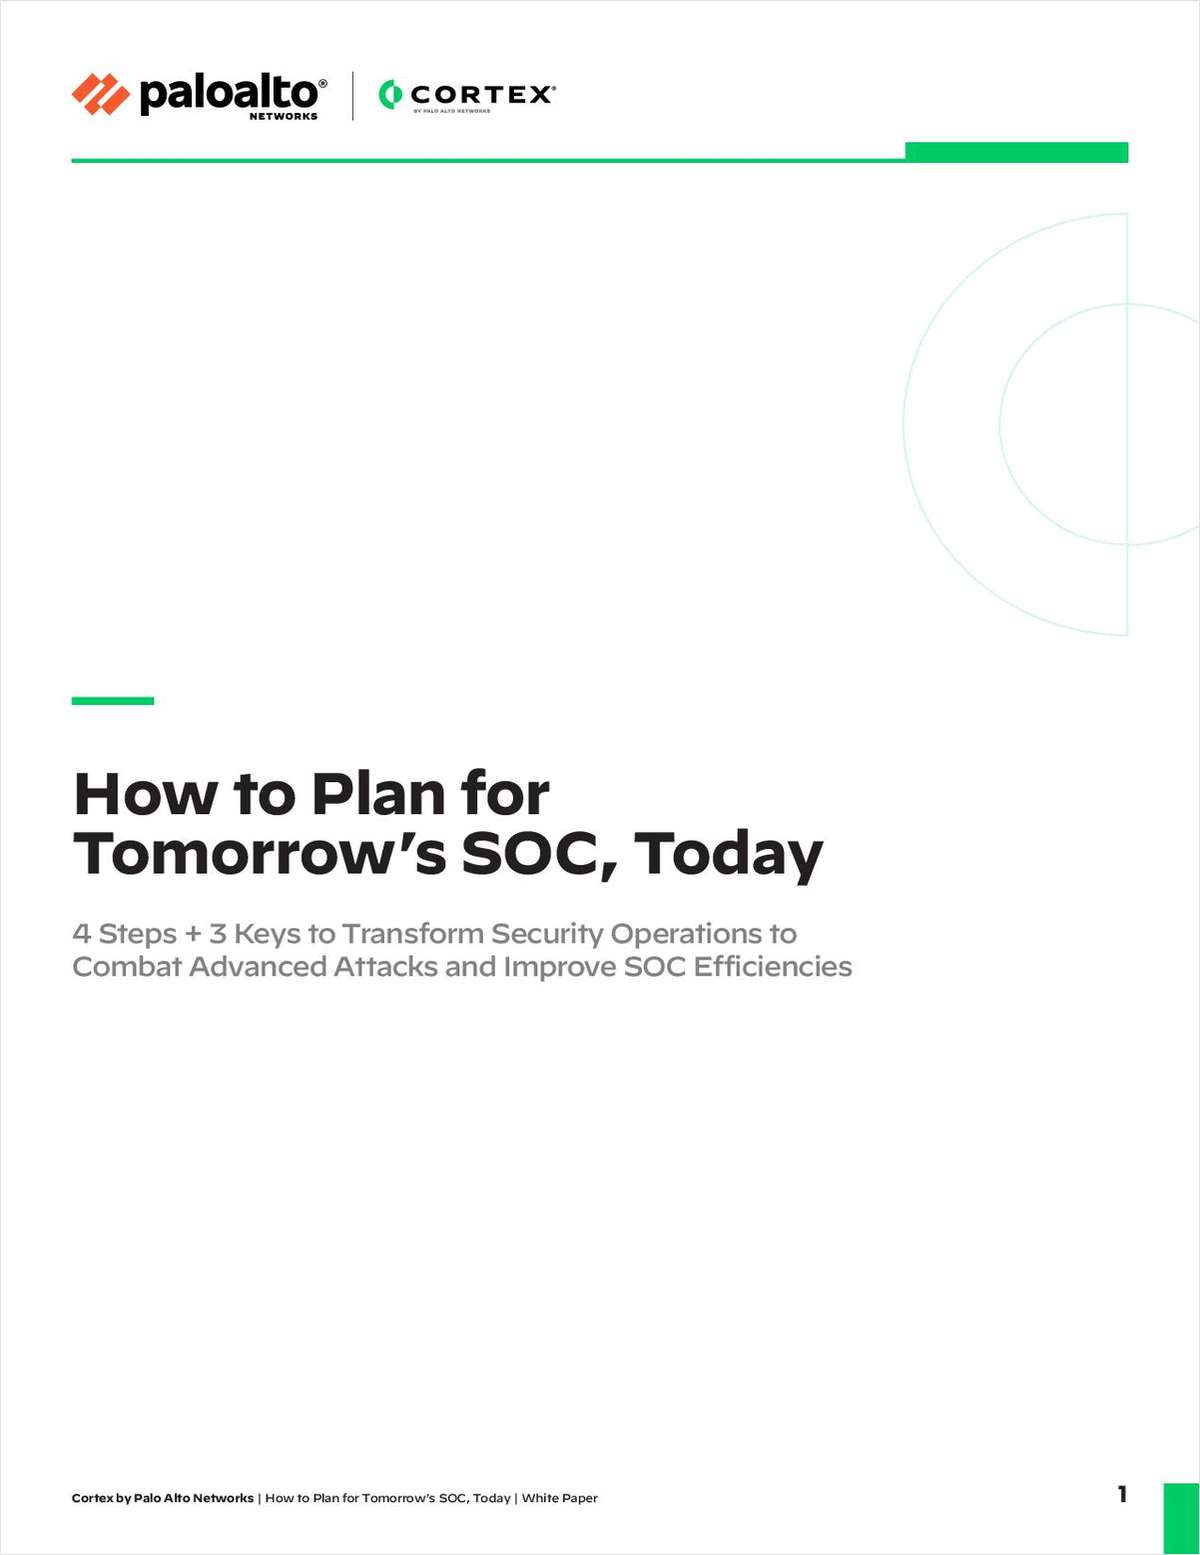 How to Plan for Tomorrow's SOC, Today